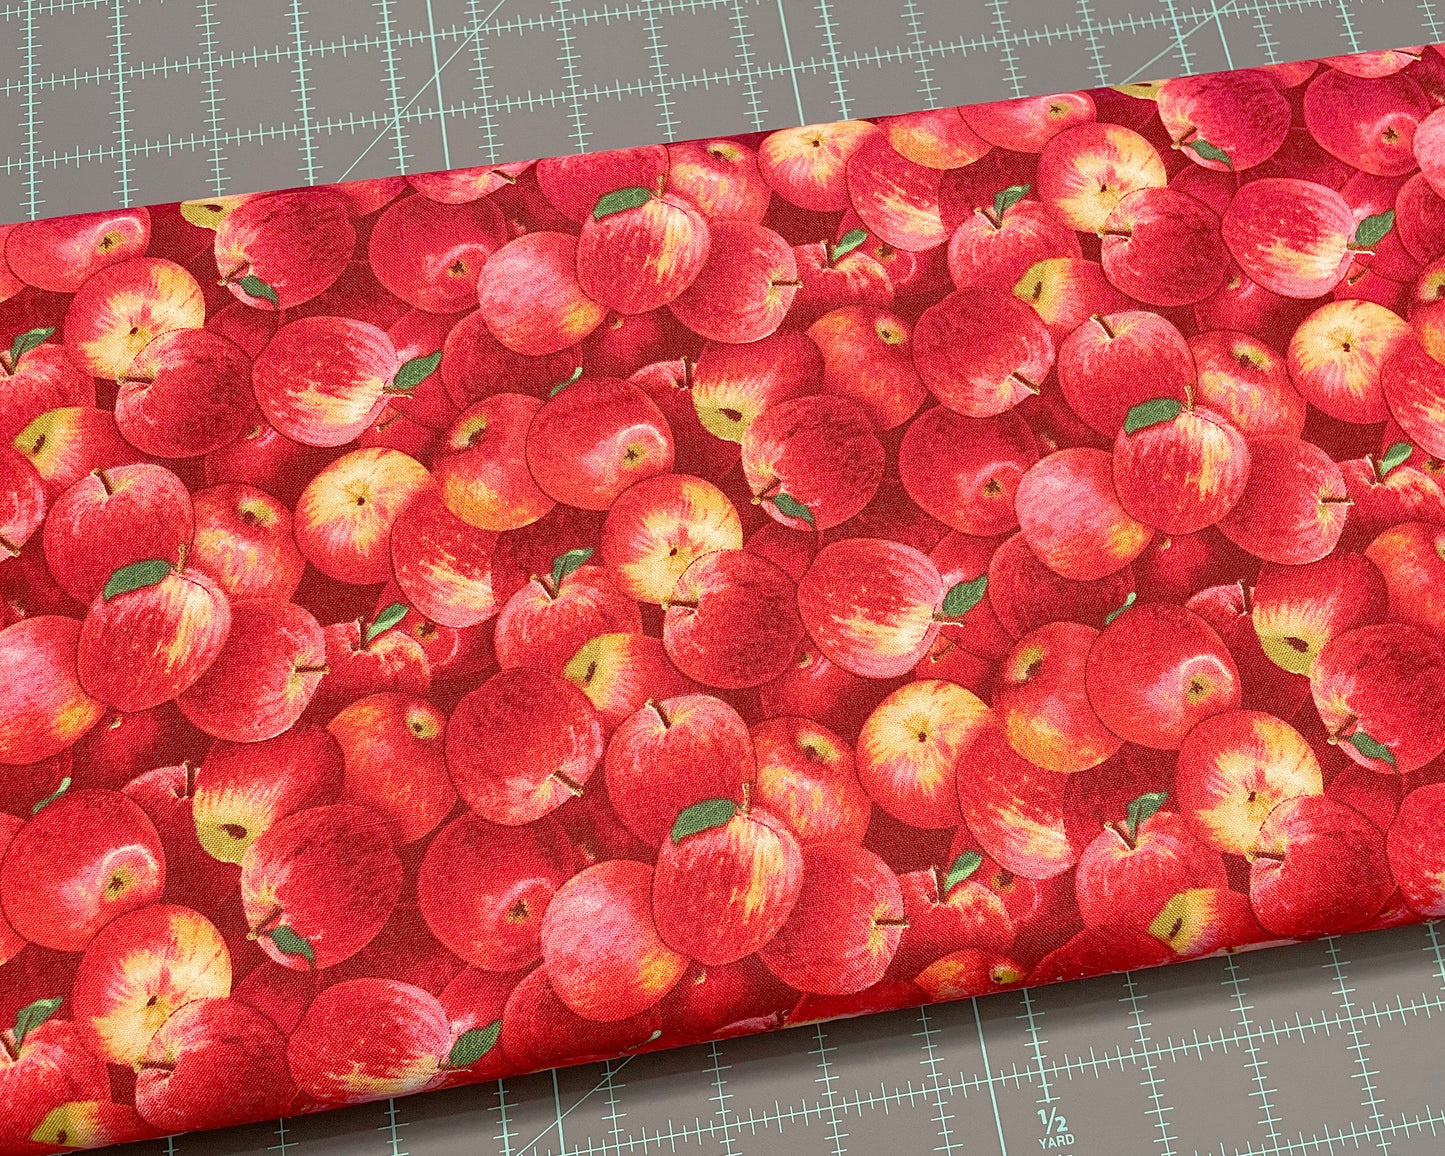 Red Apple Fabric - Food Festival collection by Elizabeth Studios - 100% Cotton Fabric - Food theme Healthy Fruit Snack - Ships NEXT DAY